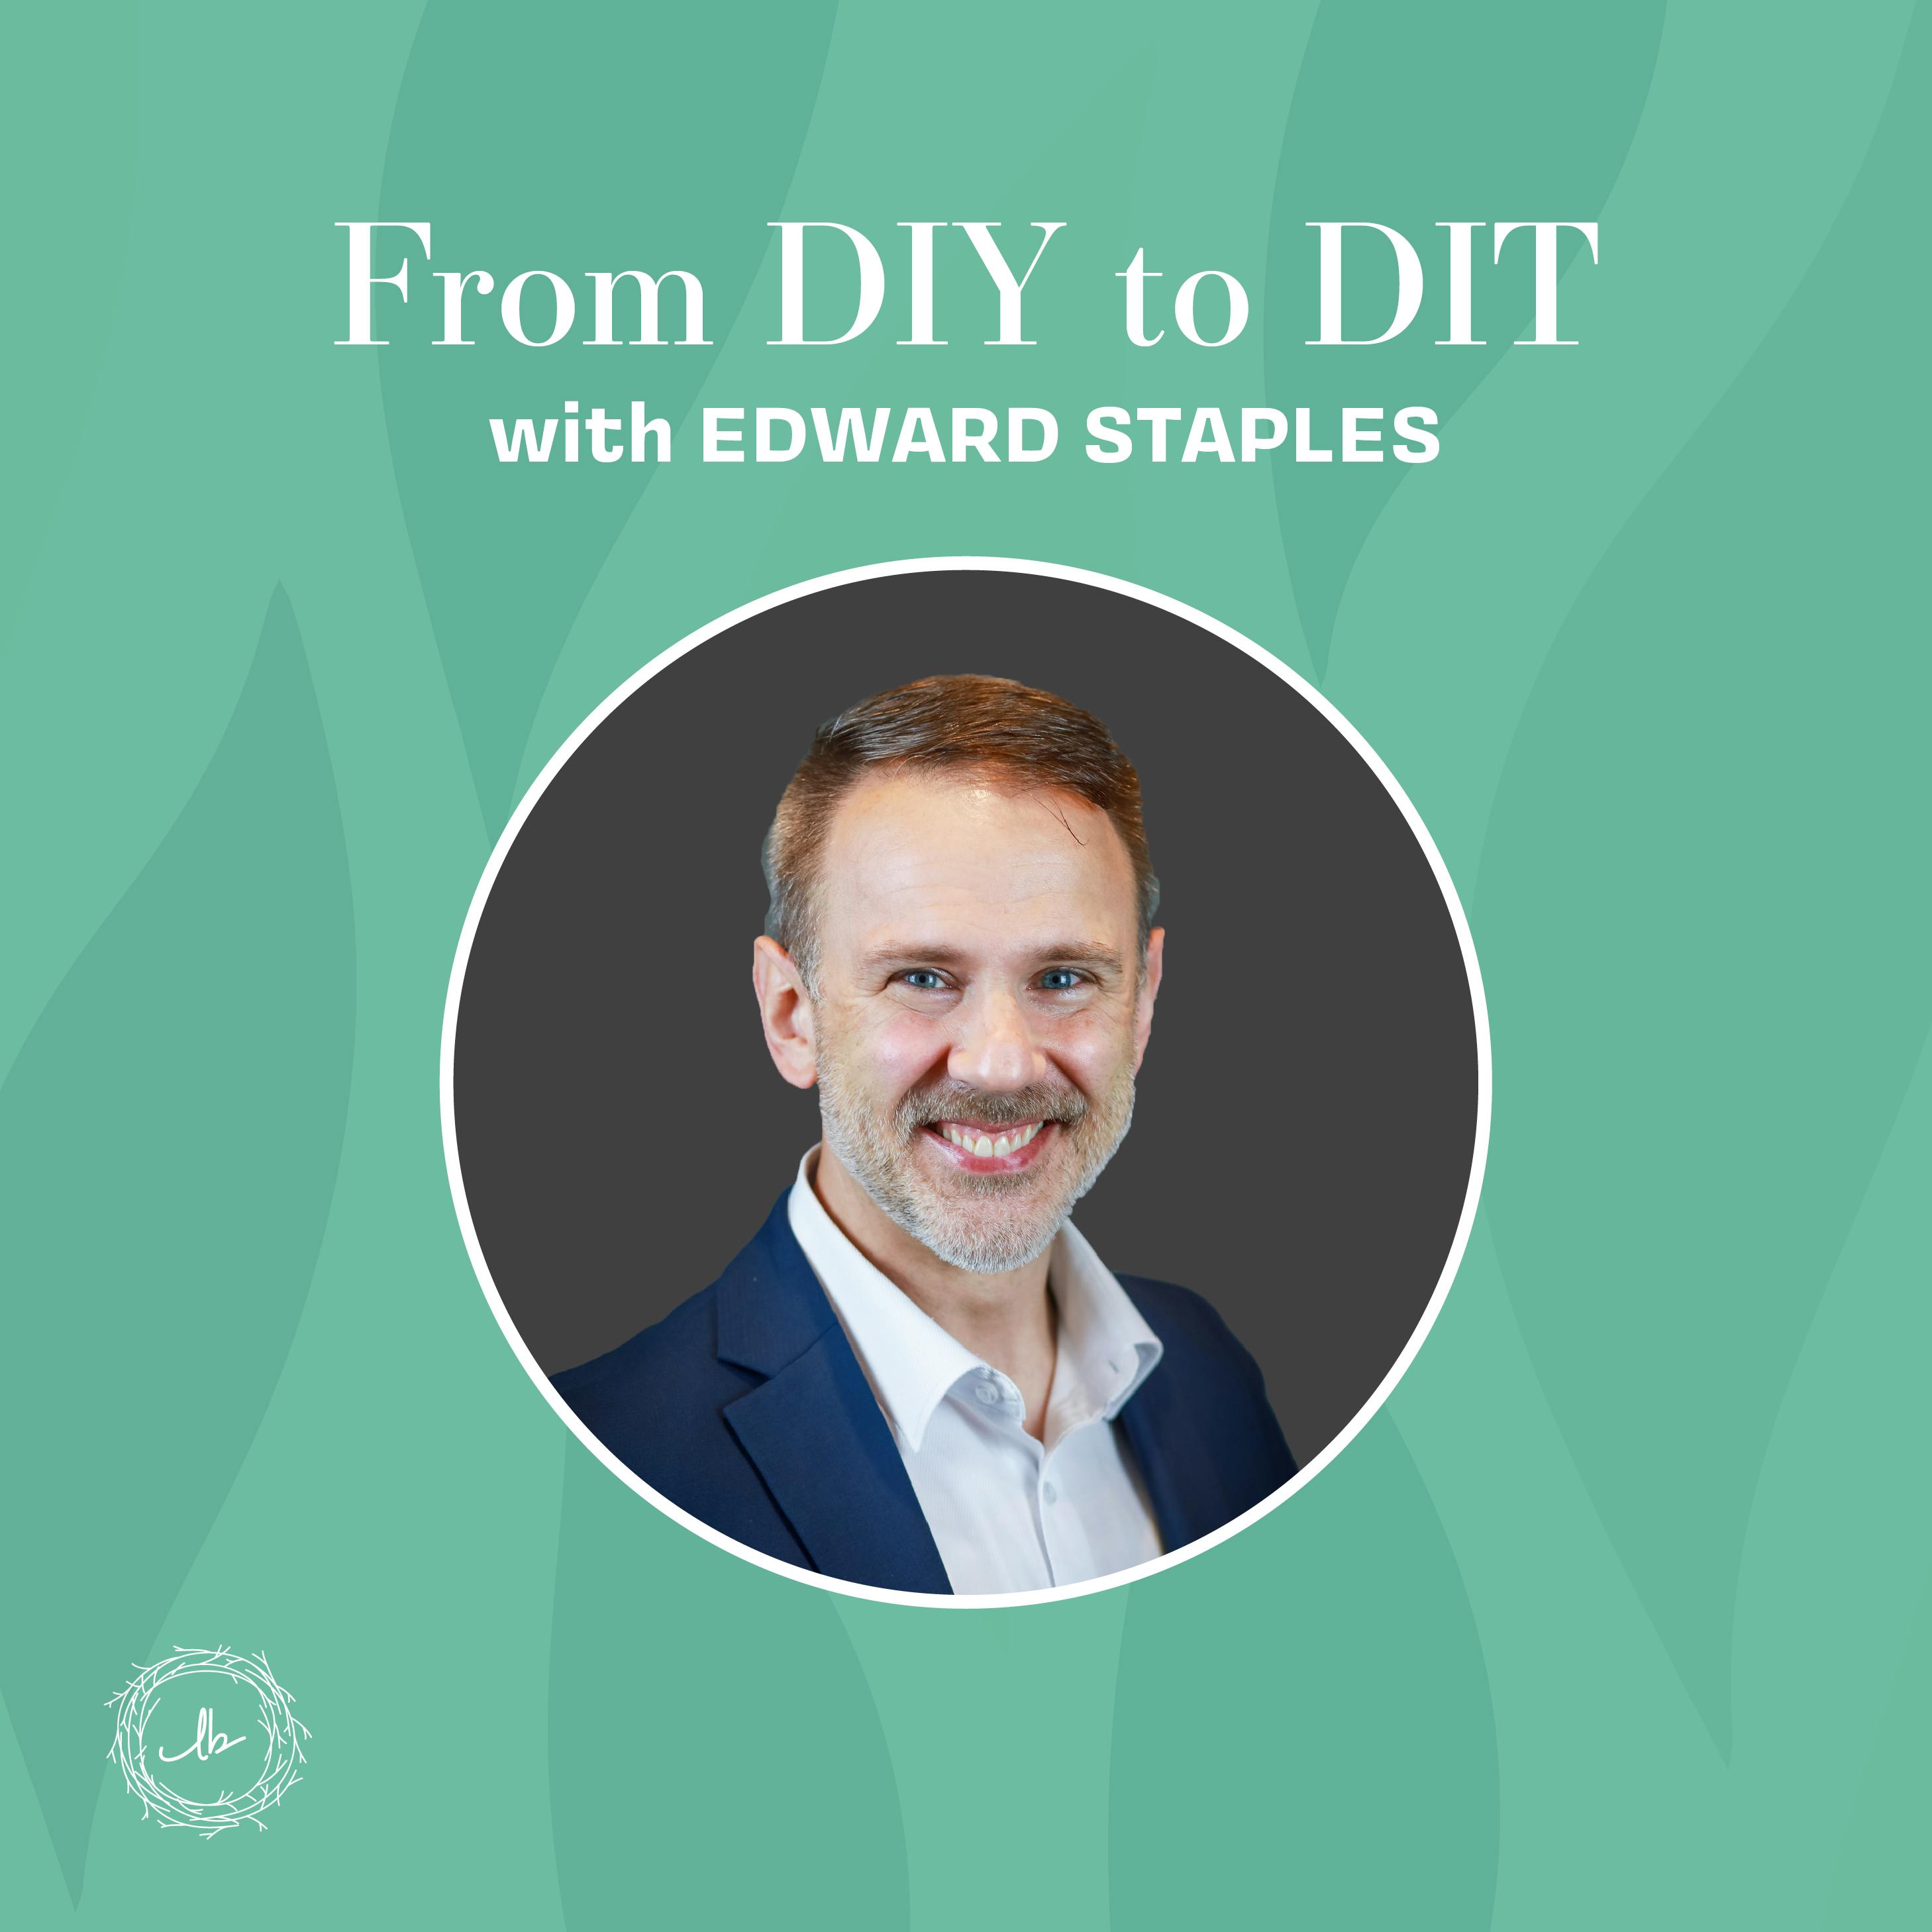 From DIY to DIT with Edward Staples